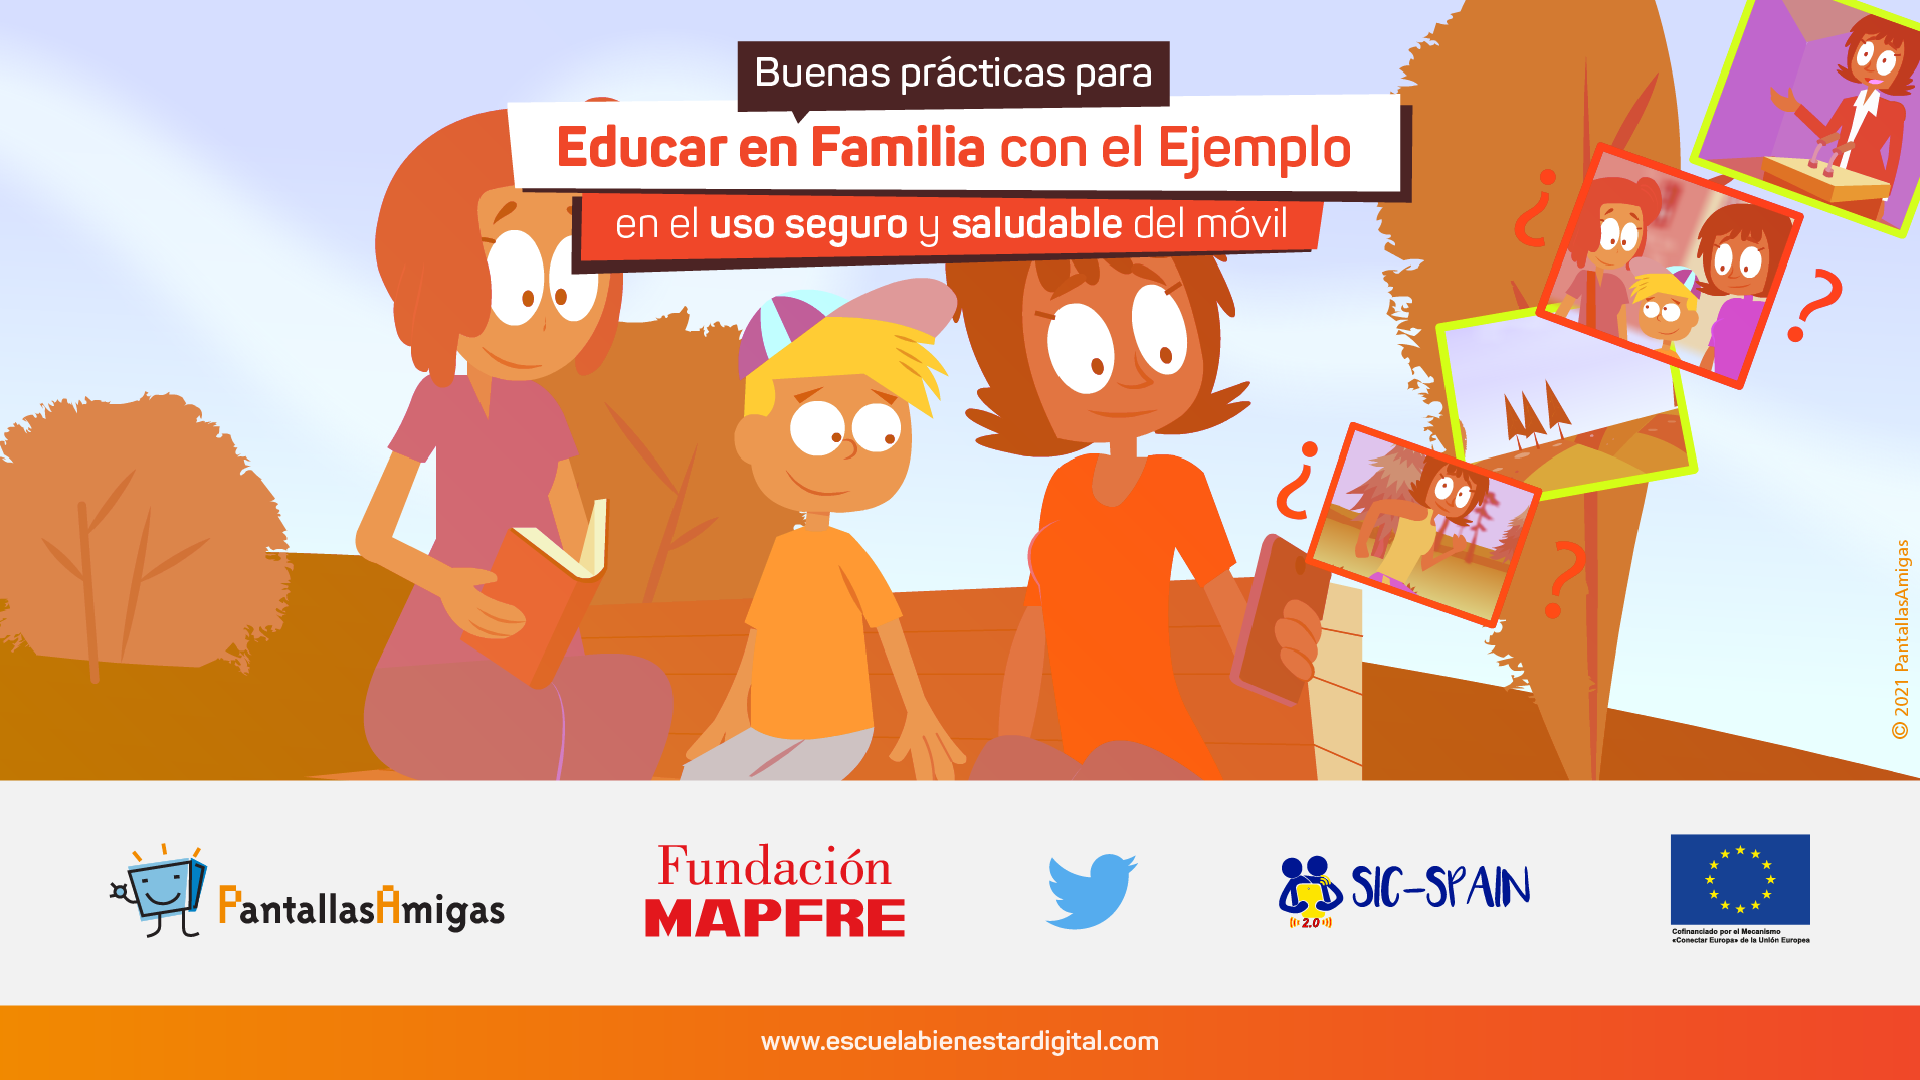 Campaign“Educating as a Family through Example in the Good Use of Mobile Phones”